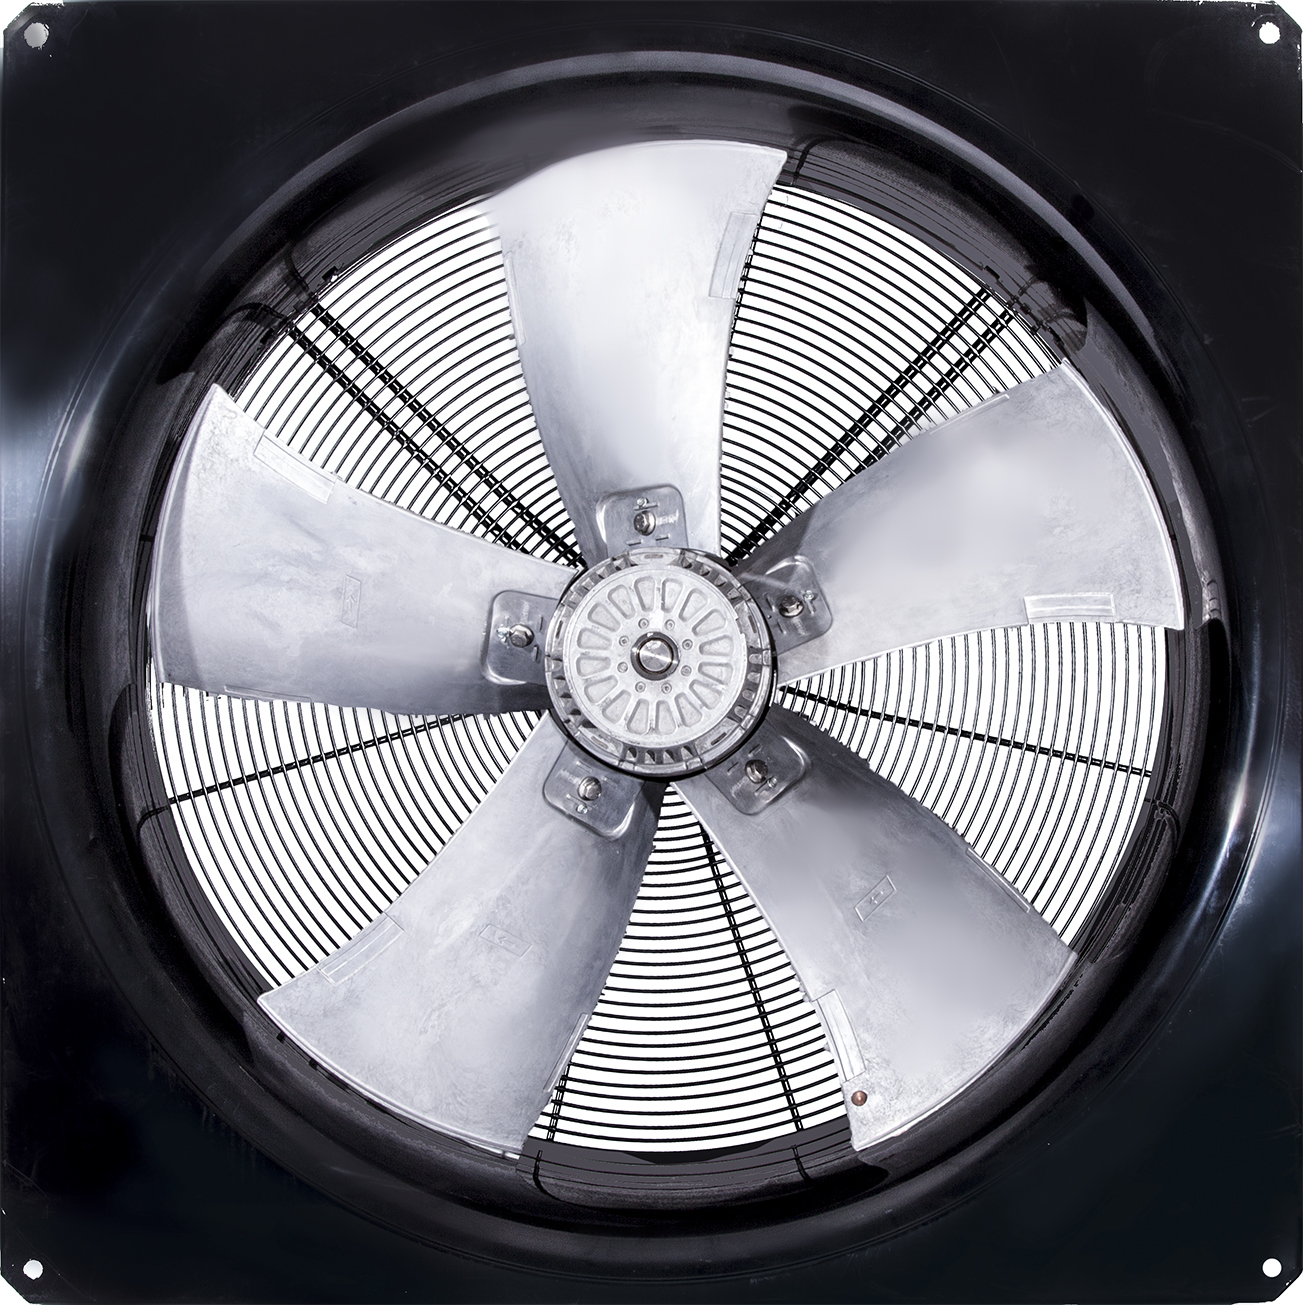 Axial fans